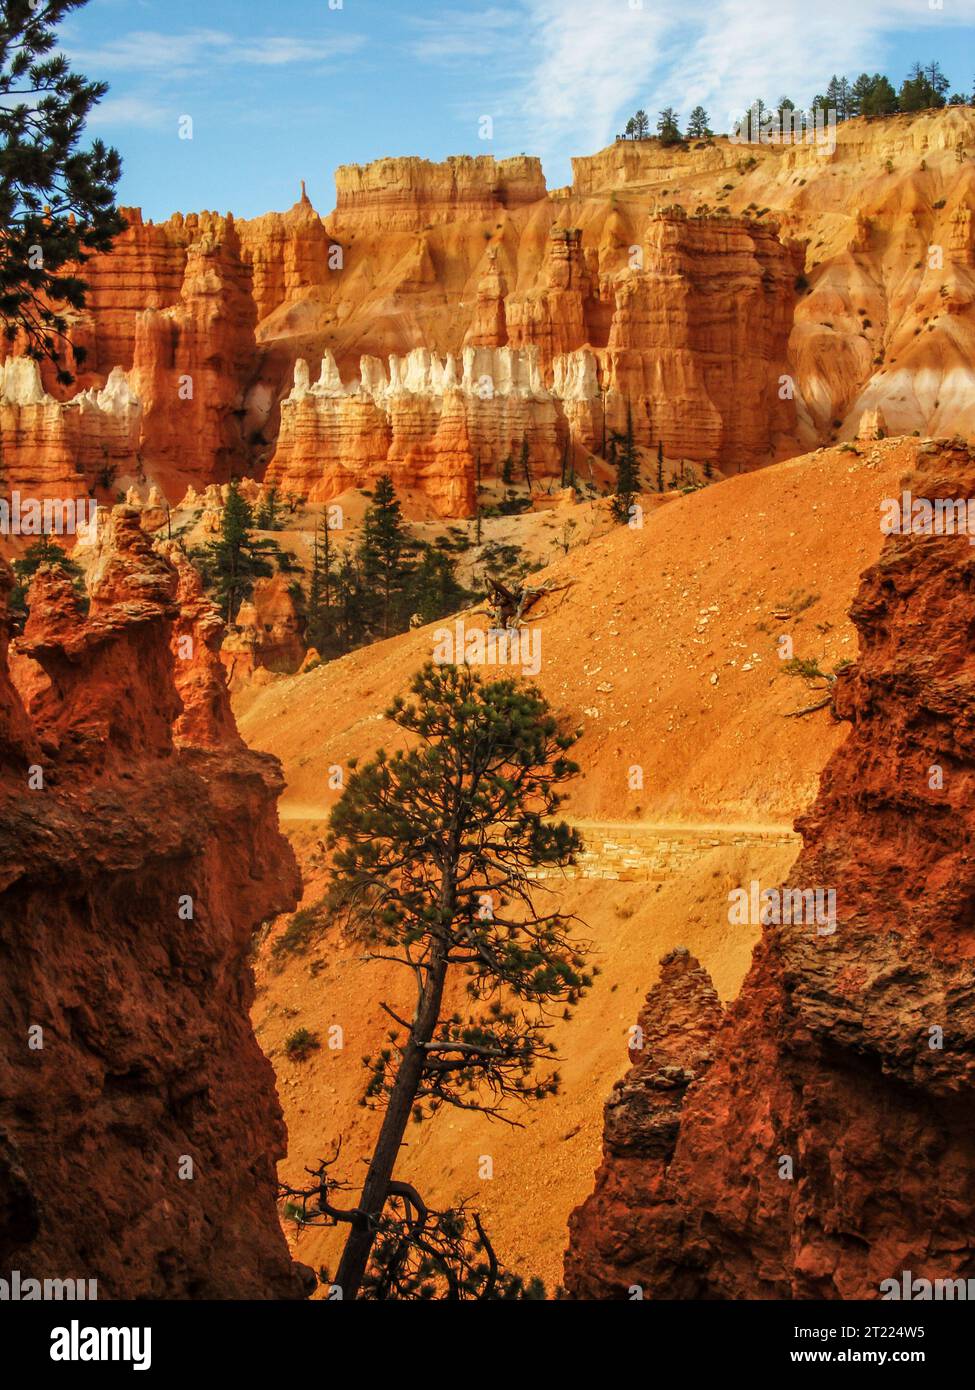 Looking through a small gap between hoodoos at a pine tree growing in this bizarre and alien-like spire filled landscape of Bryce Canyon, Utah. Stock Photo